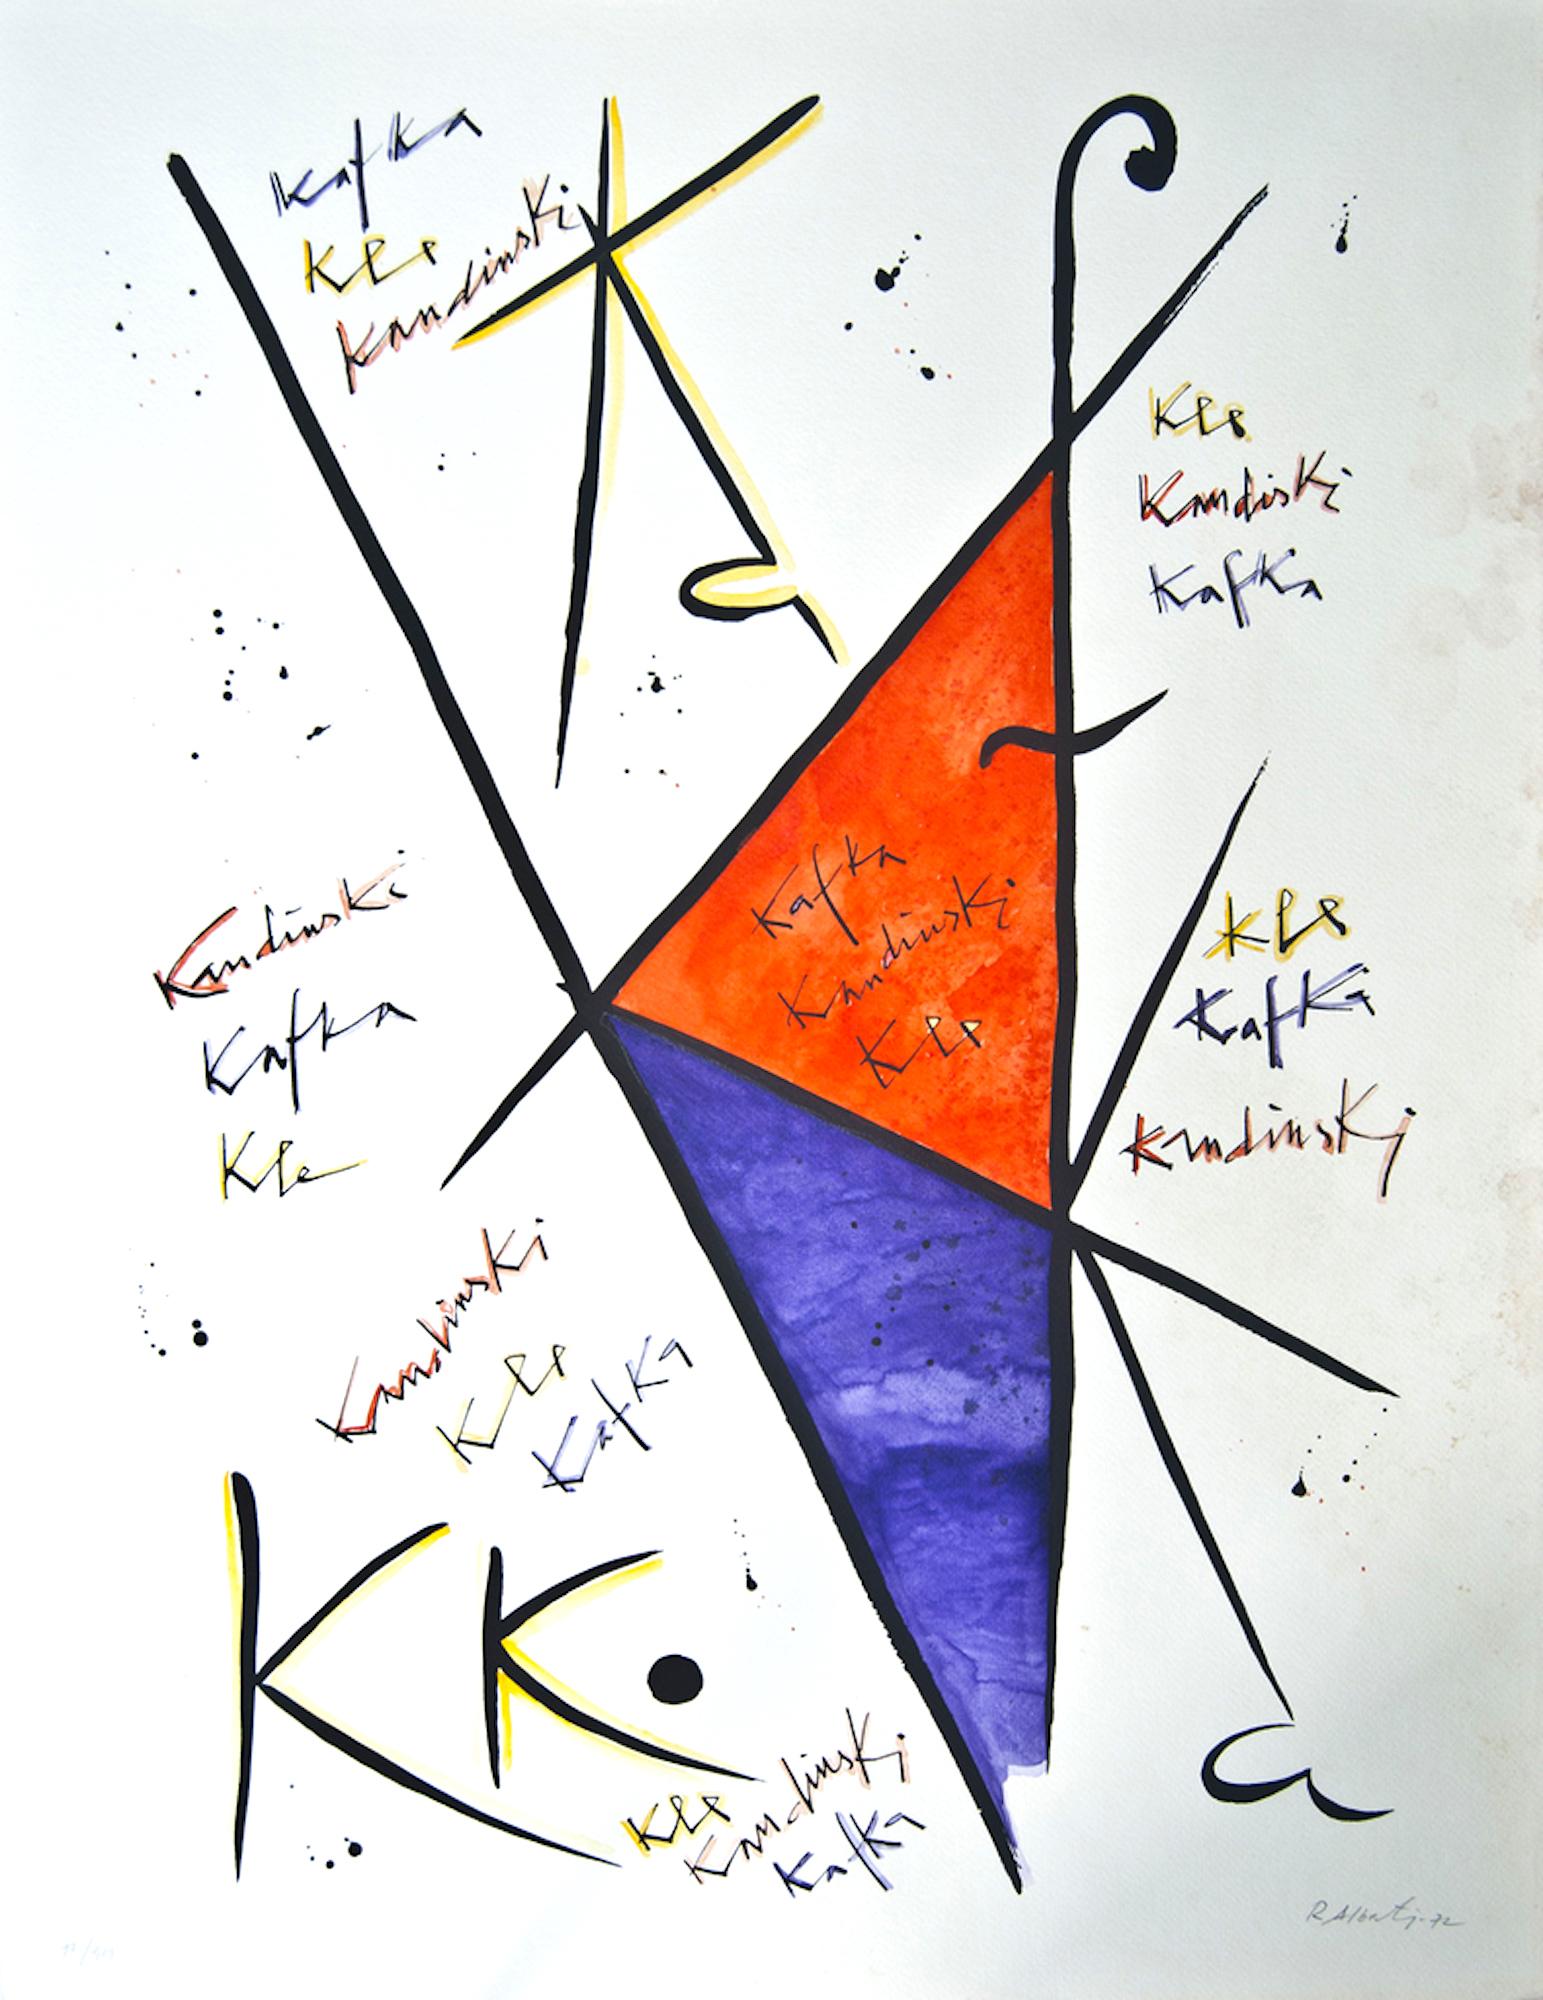 Letter K - Lithograph by Raphael Alberti - 1972